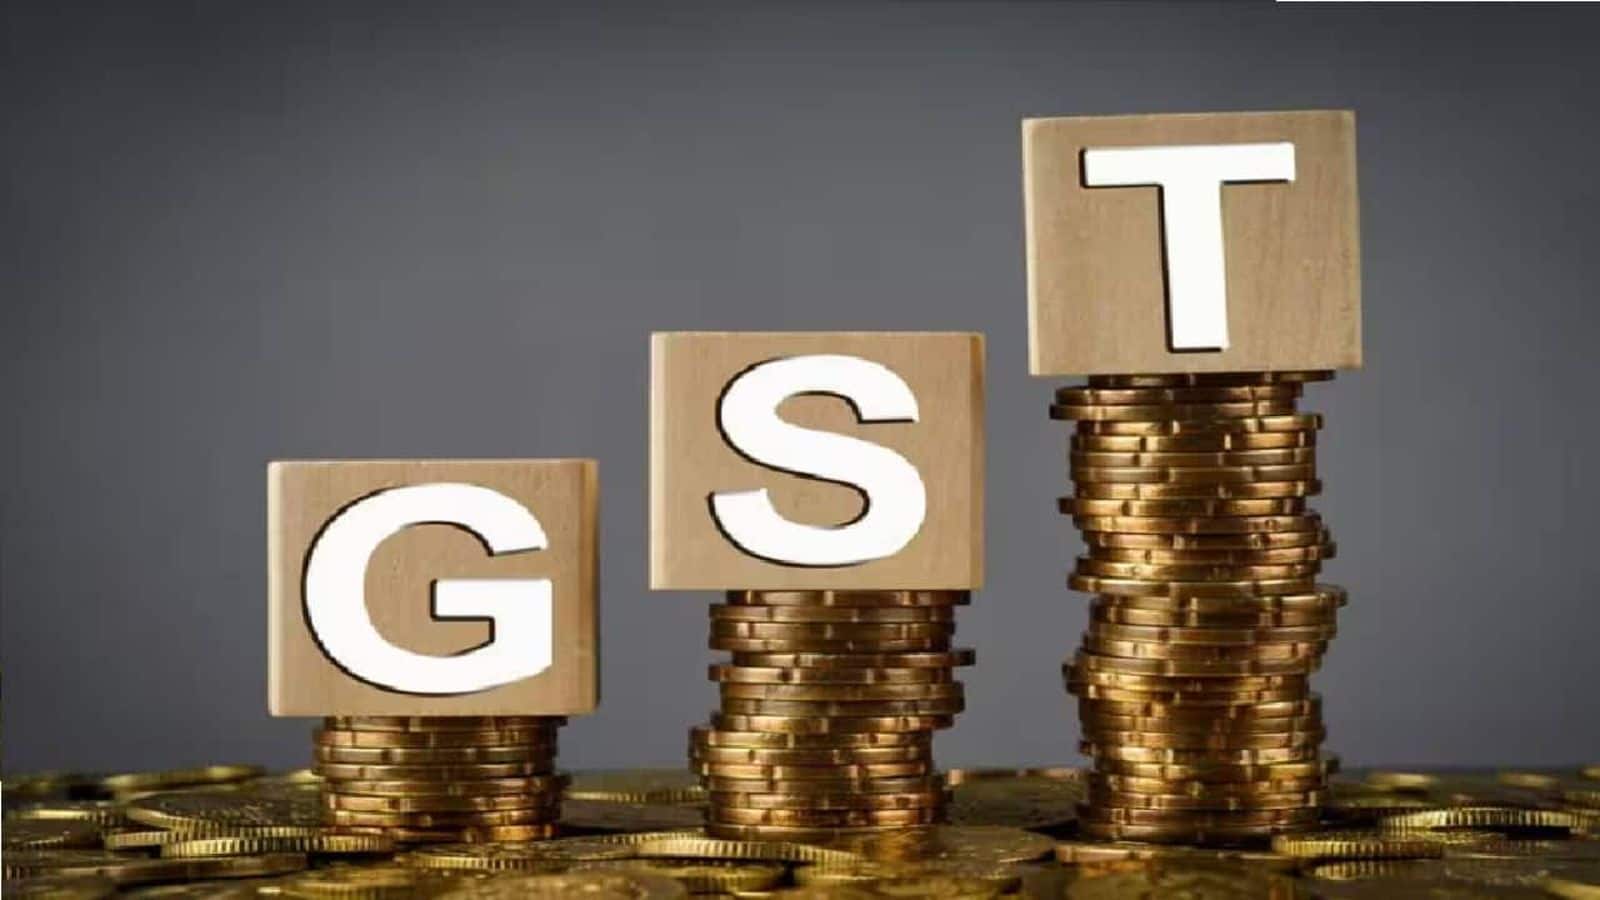 GST collections reach record high of ₹2.1L crore in April